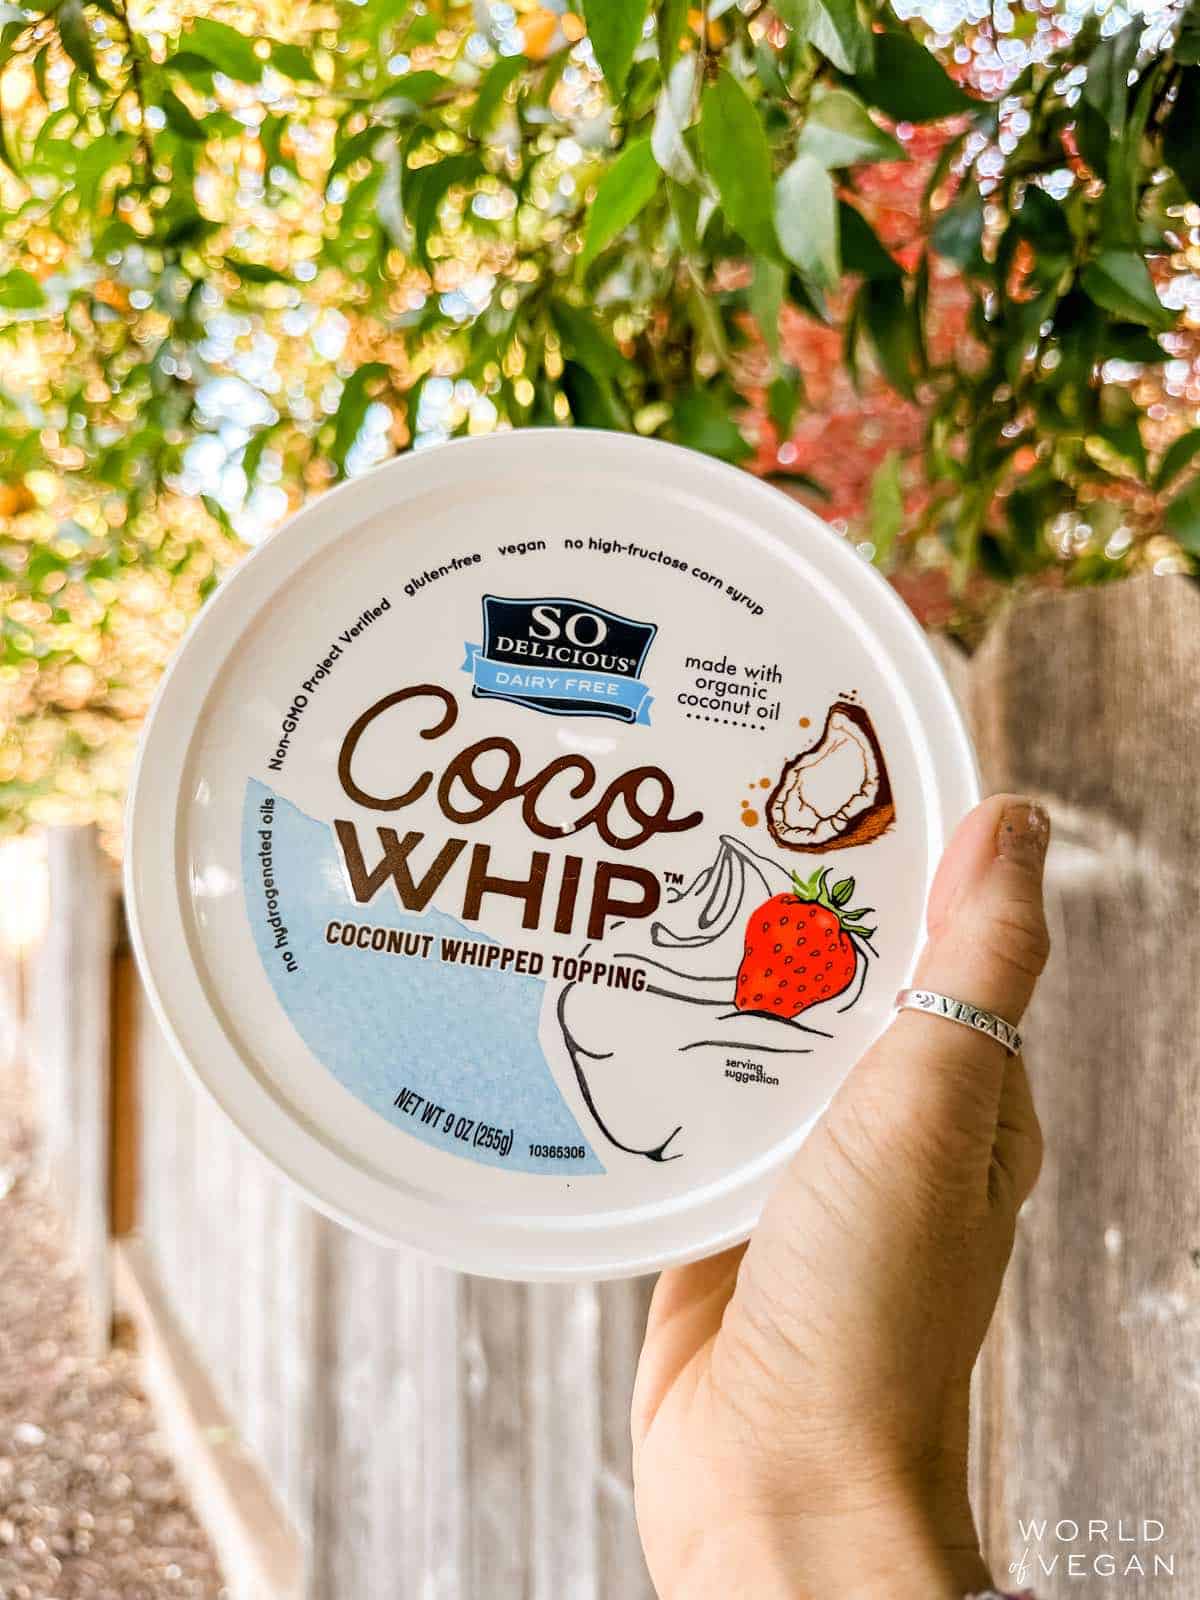 Store bought tub of coco whip coconut whipped cream from the vegan brand So Delicious. 